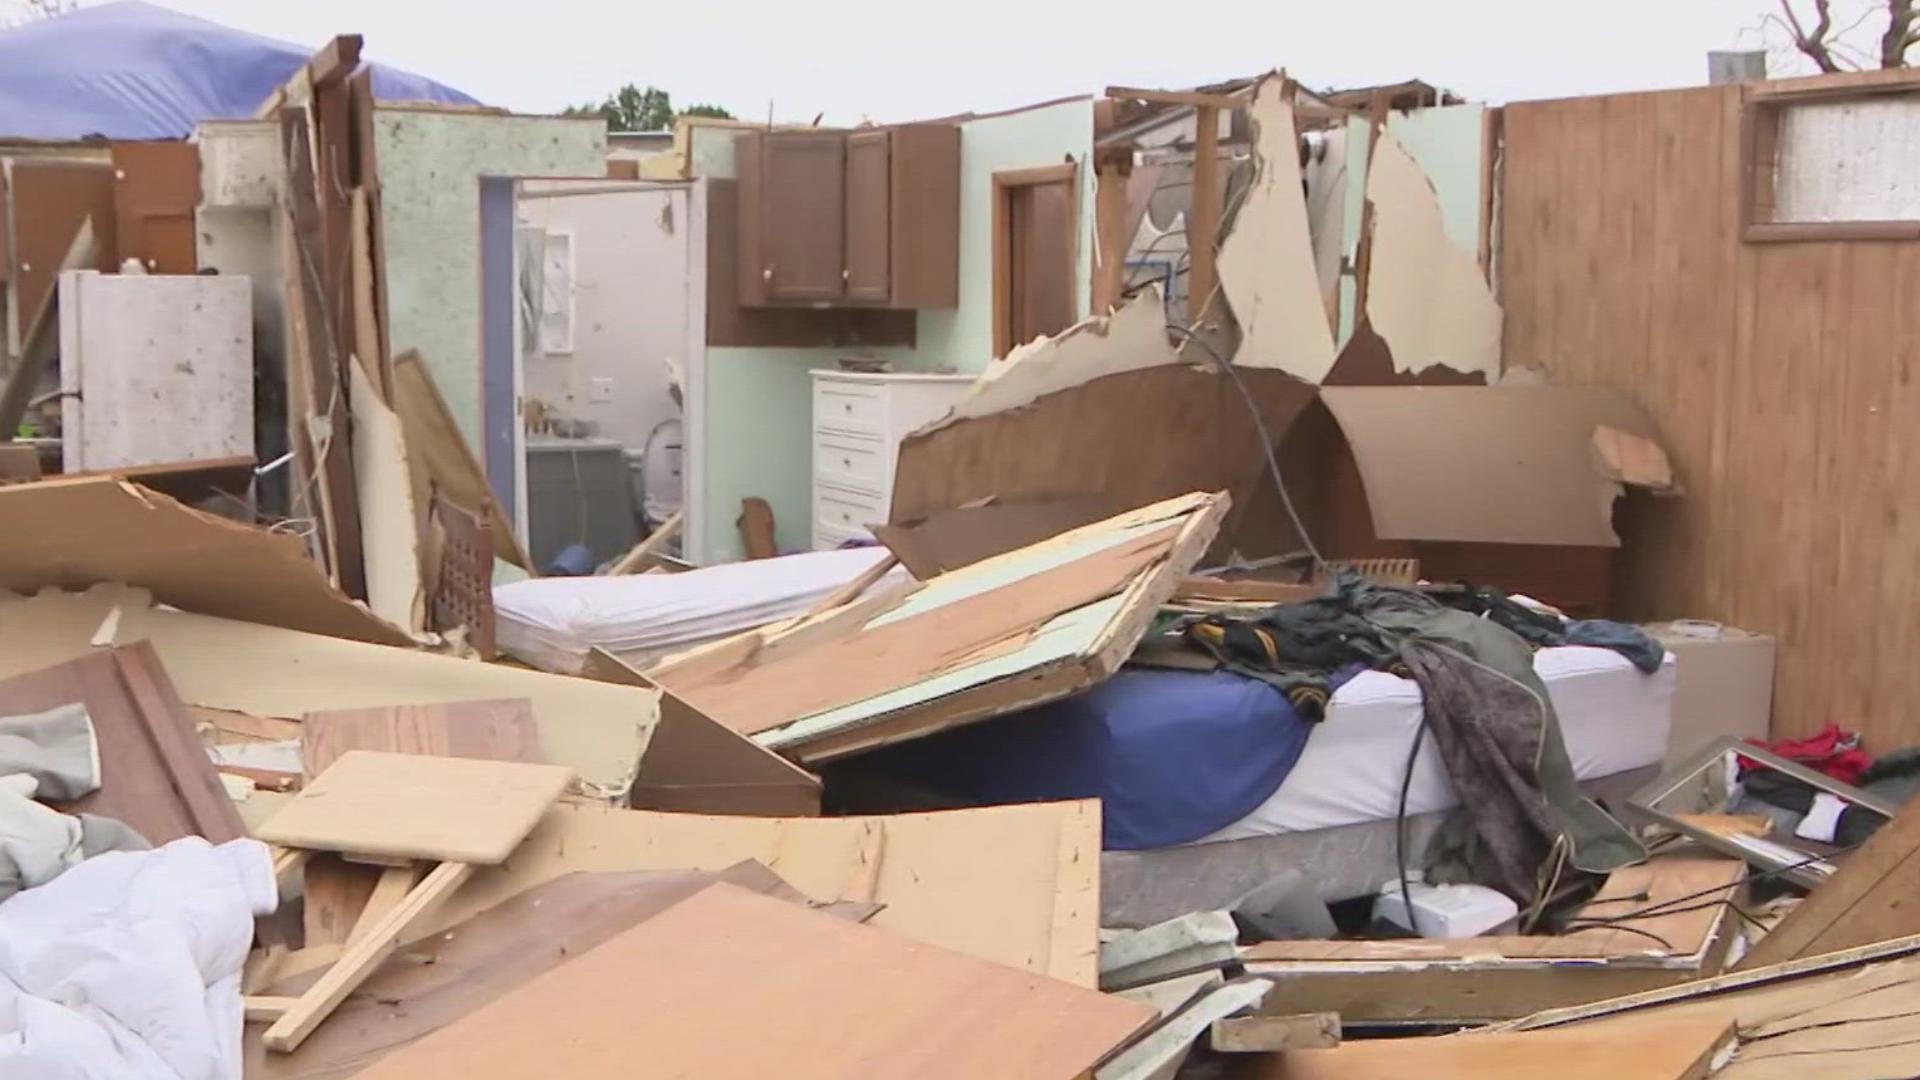 Days after a powerful EF-4 tornado tore through town, another round of severe weather impacted the community of Greenfield once again.